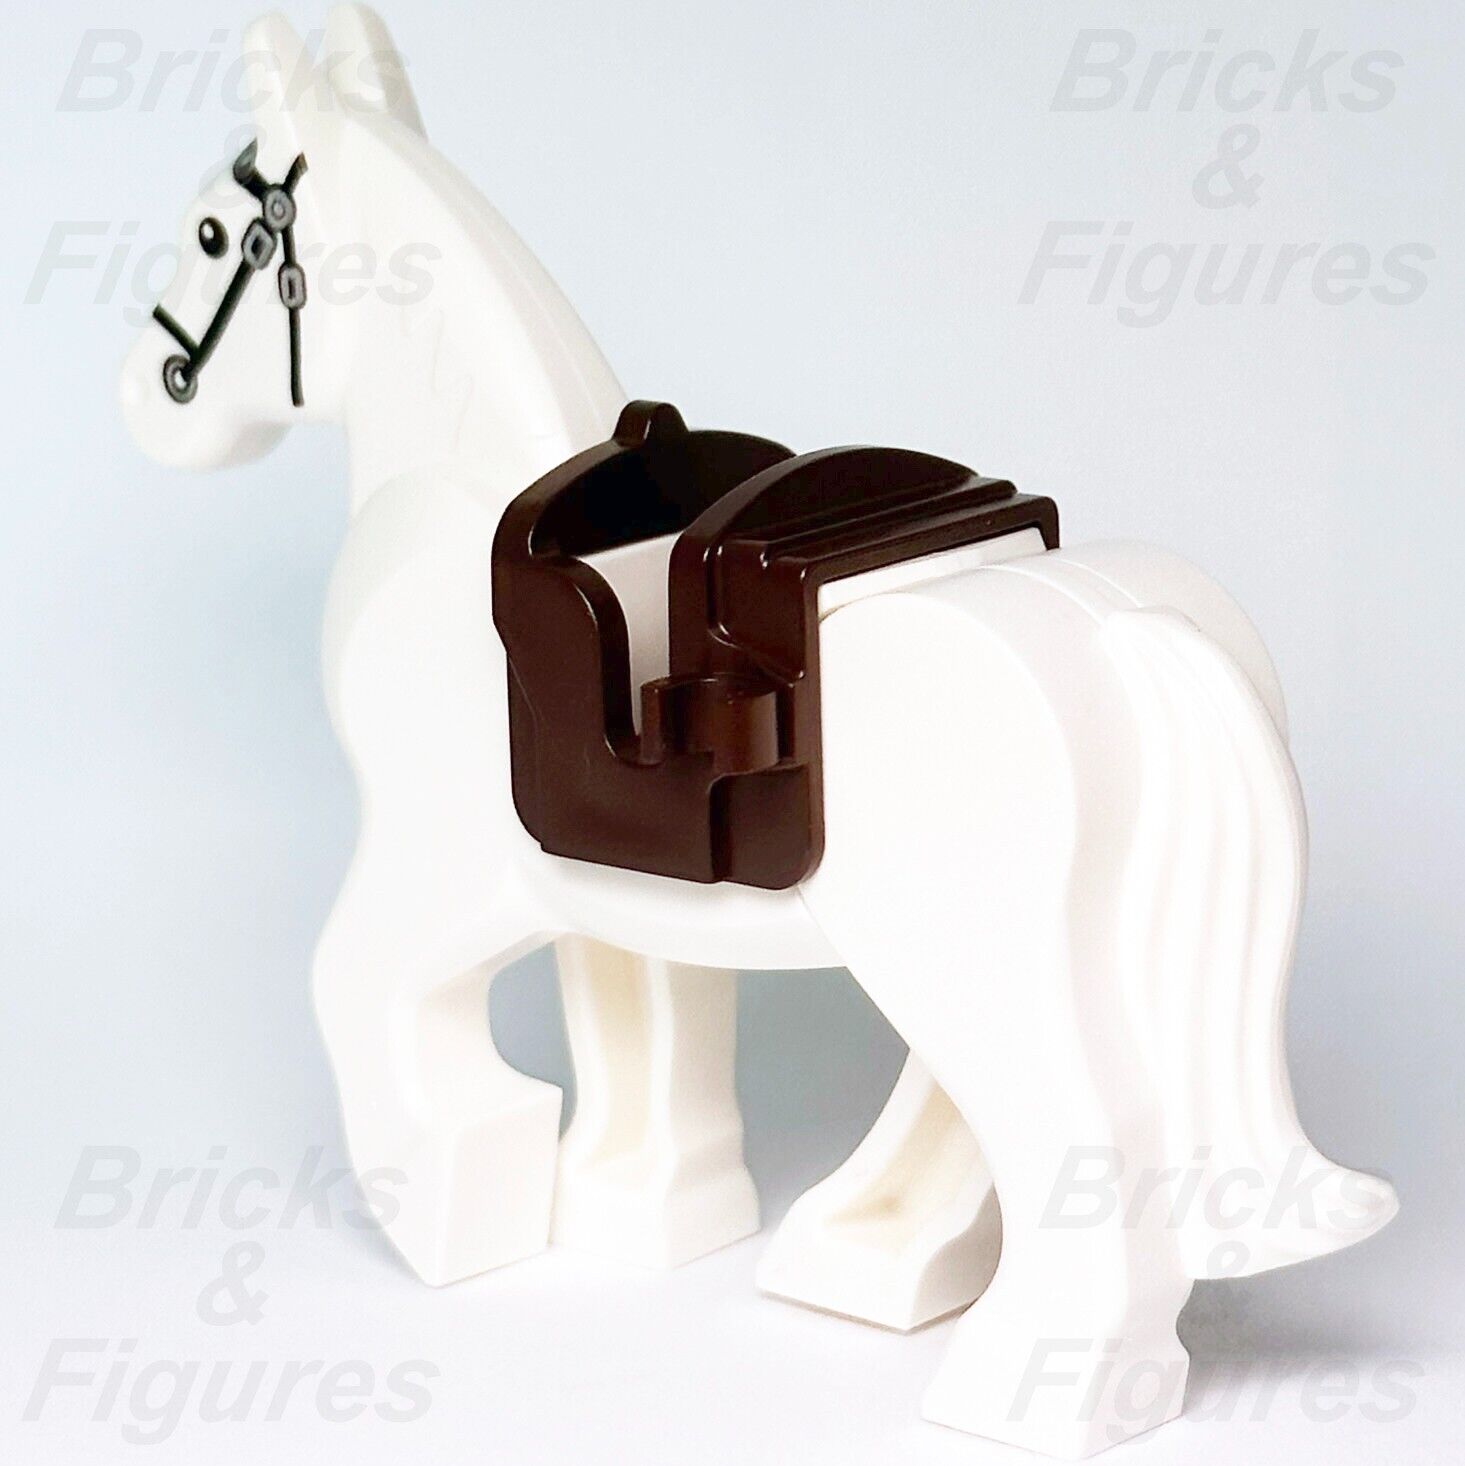 LEGO Horse Saddle w/ Two Clips Dark Brown Animal Part Town City 4491B 18306 New - Bricks & Figures